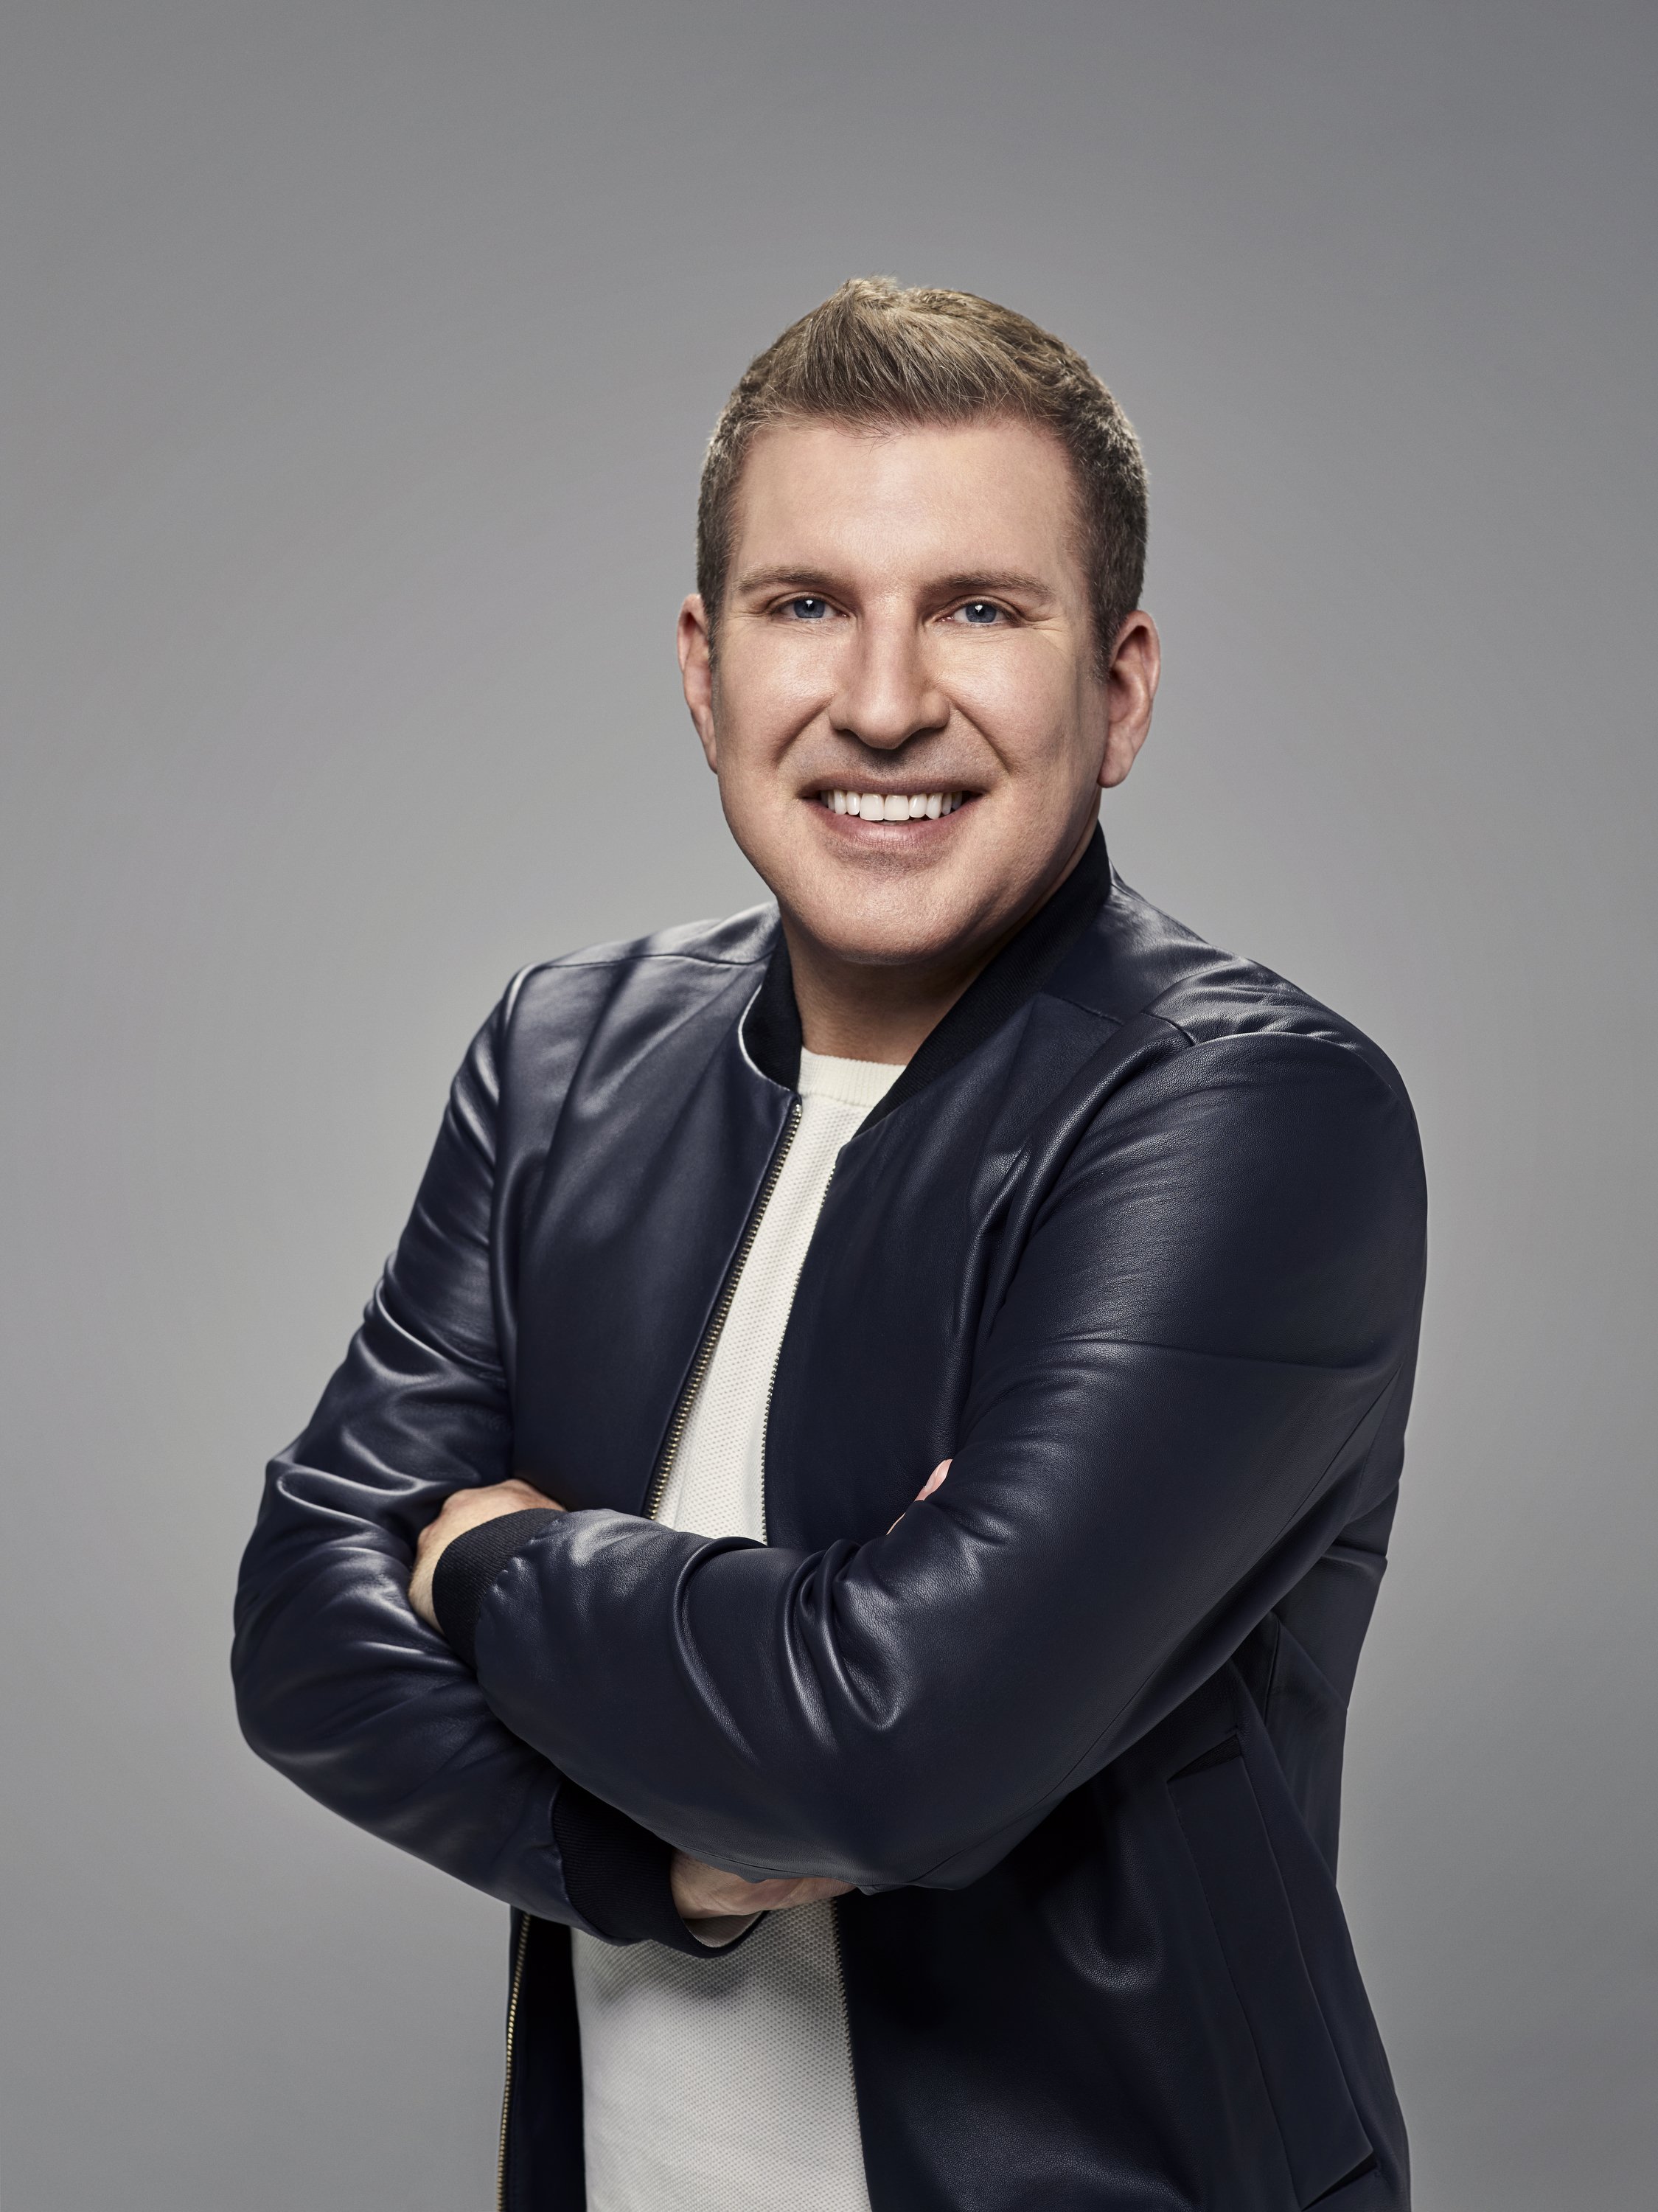 Todd Chrisley in "CHRISLEY KNOWS BEST." | Source: Getty Images